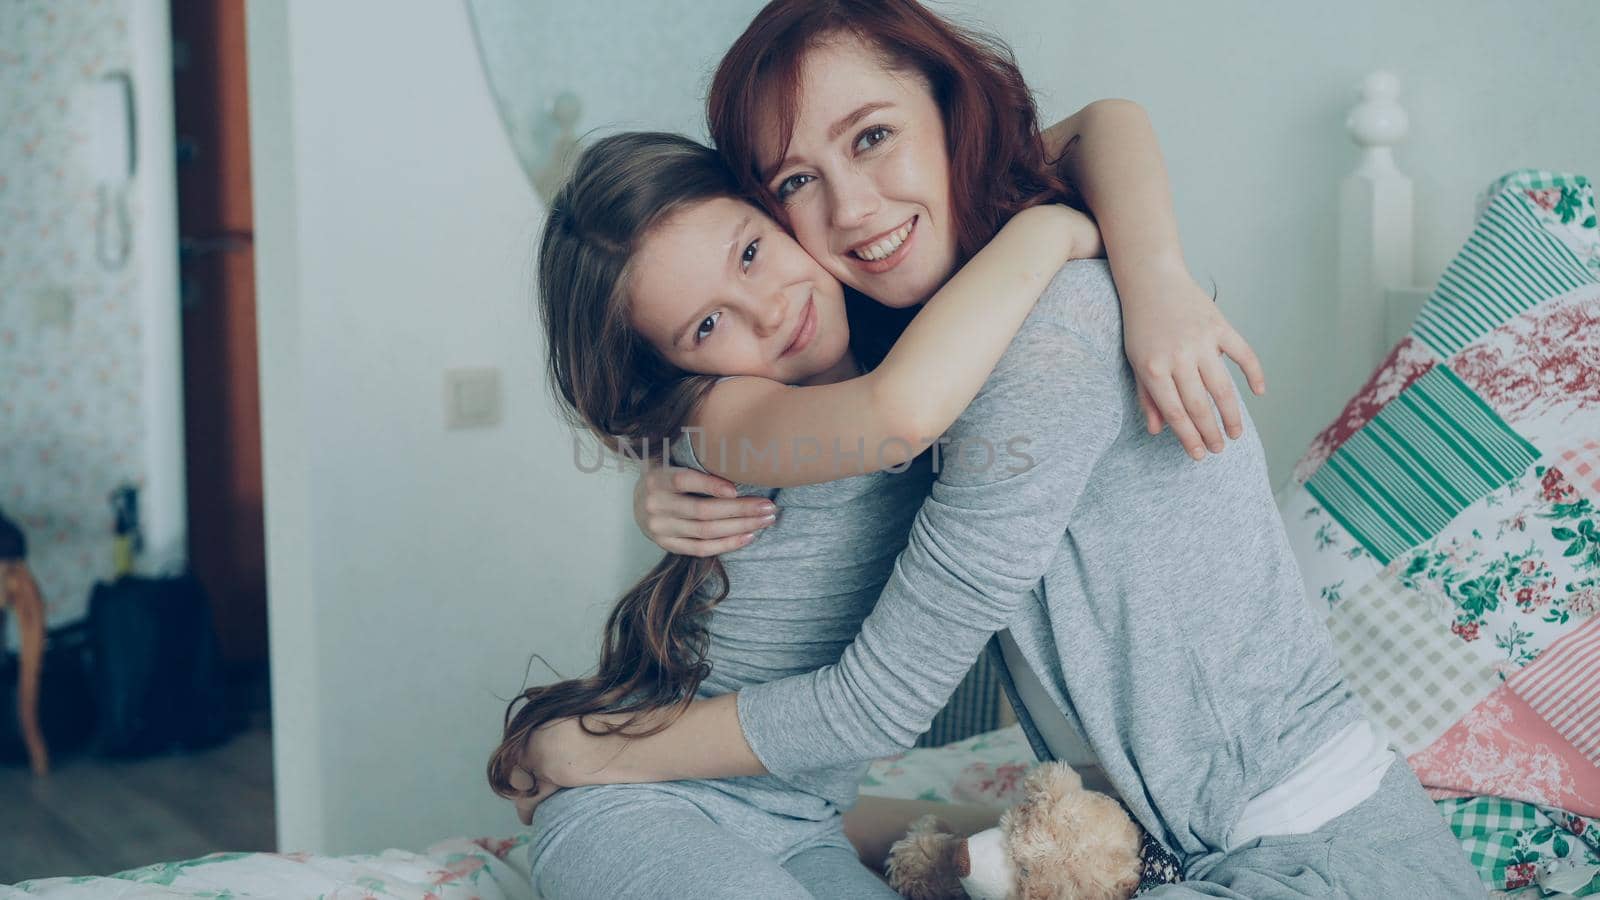 Portrait of cute smiling girl embracing her happy mother looking at camera together while sitting on bed in bright bedroom at home by silverkblack